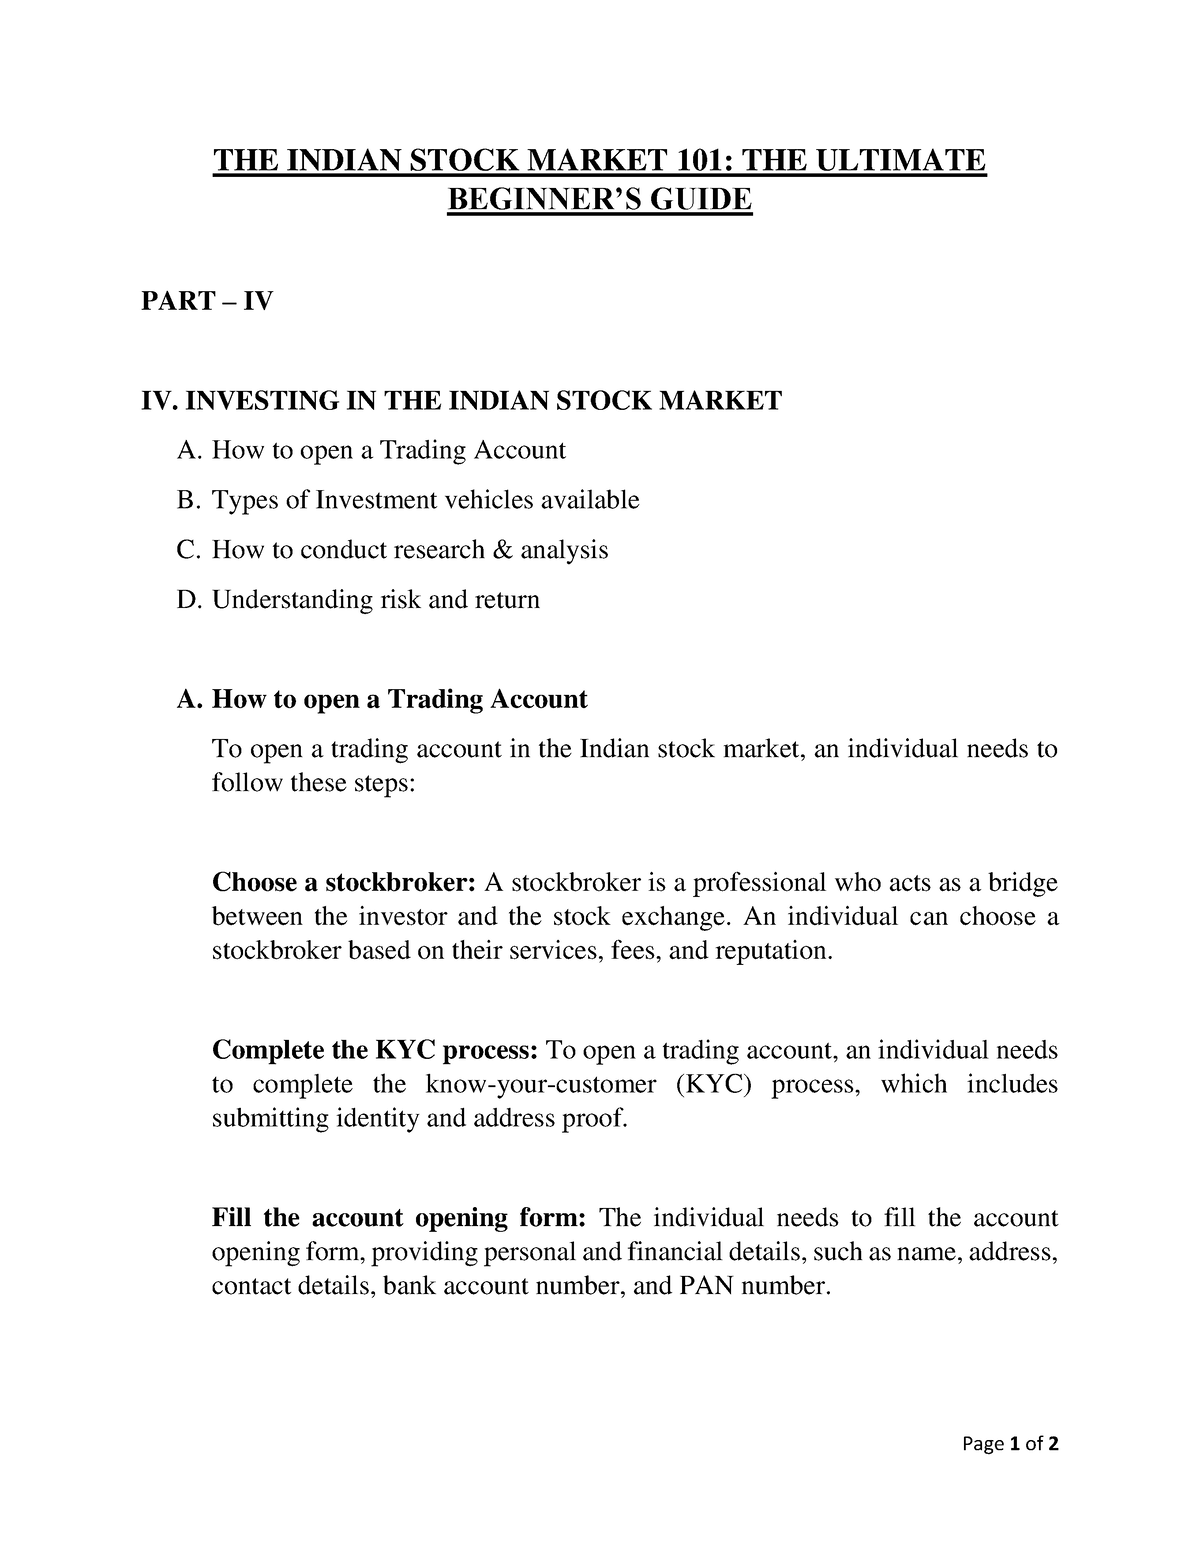 Investing in the Indian Stock Market Part IV A Page 1 of 2 THE